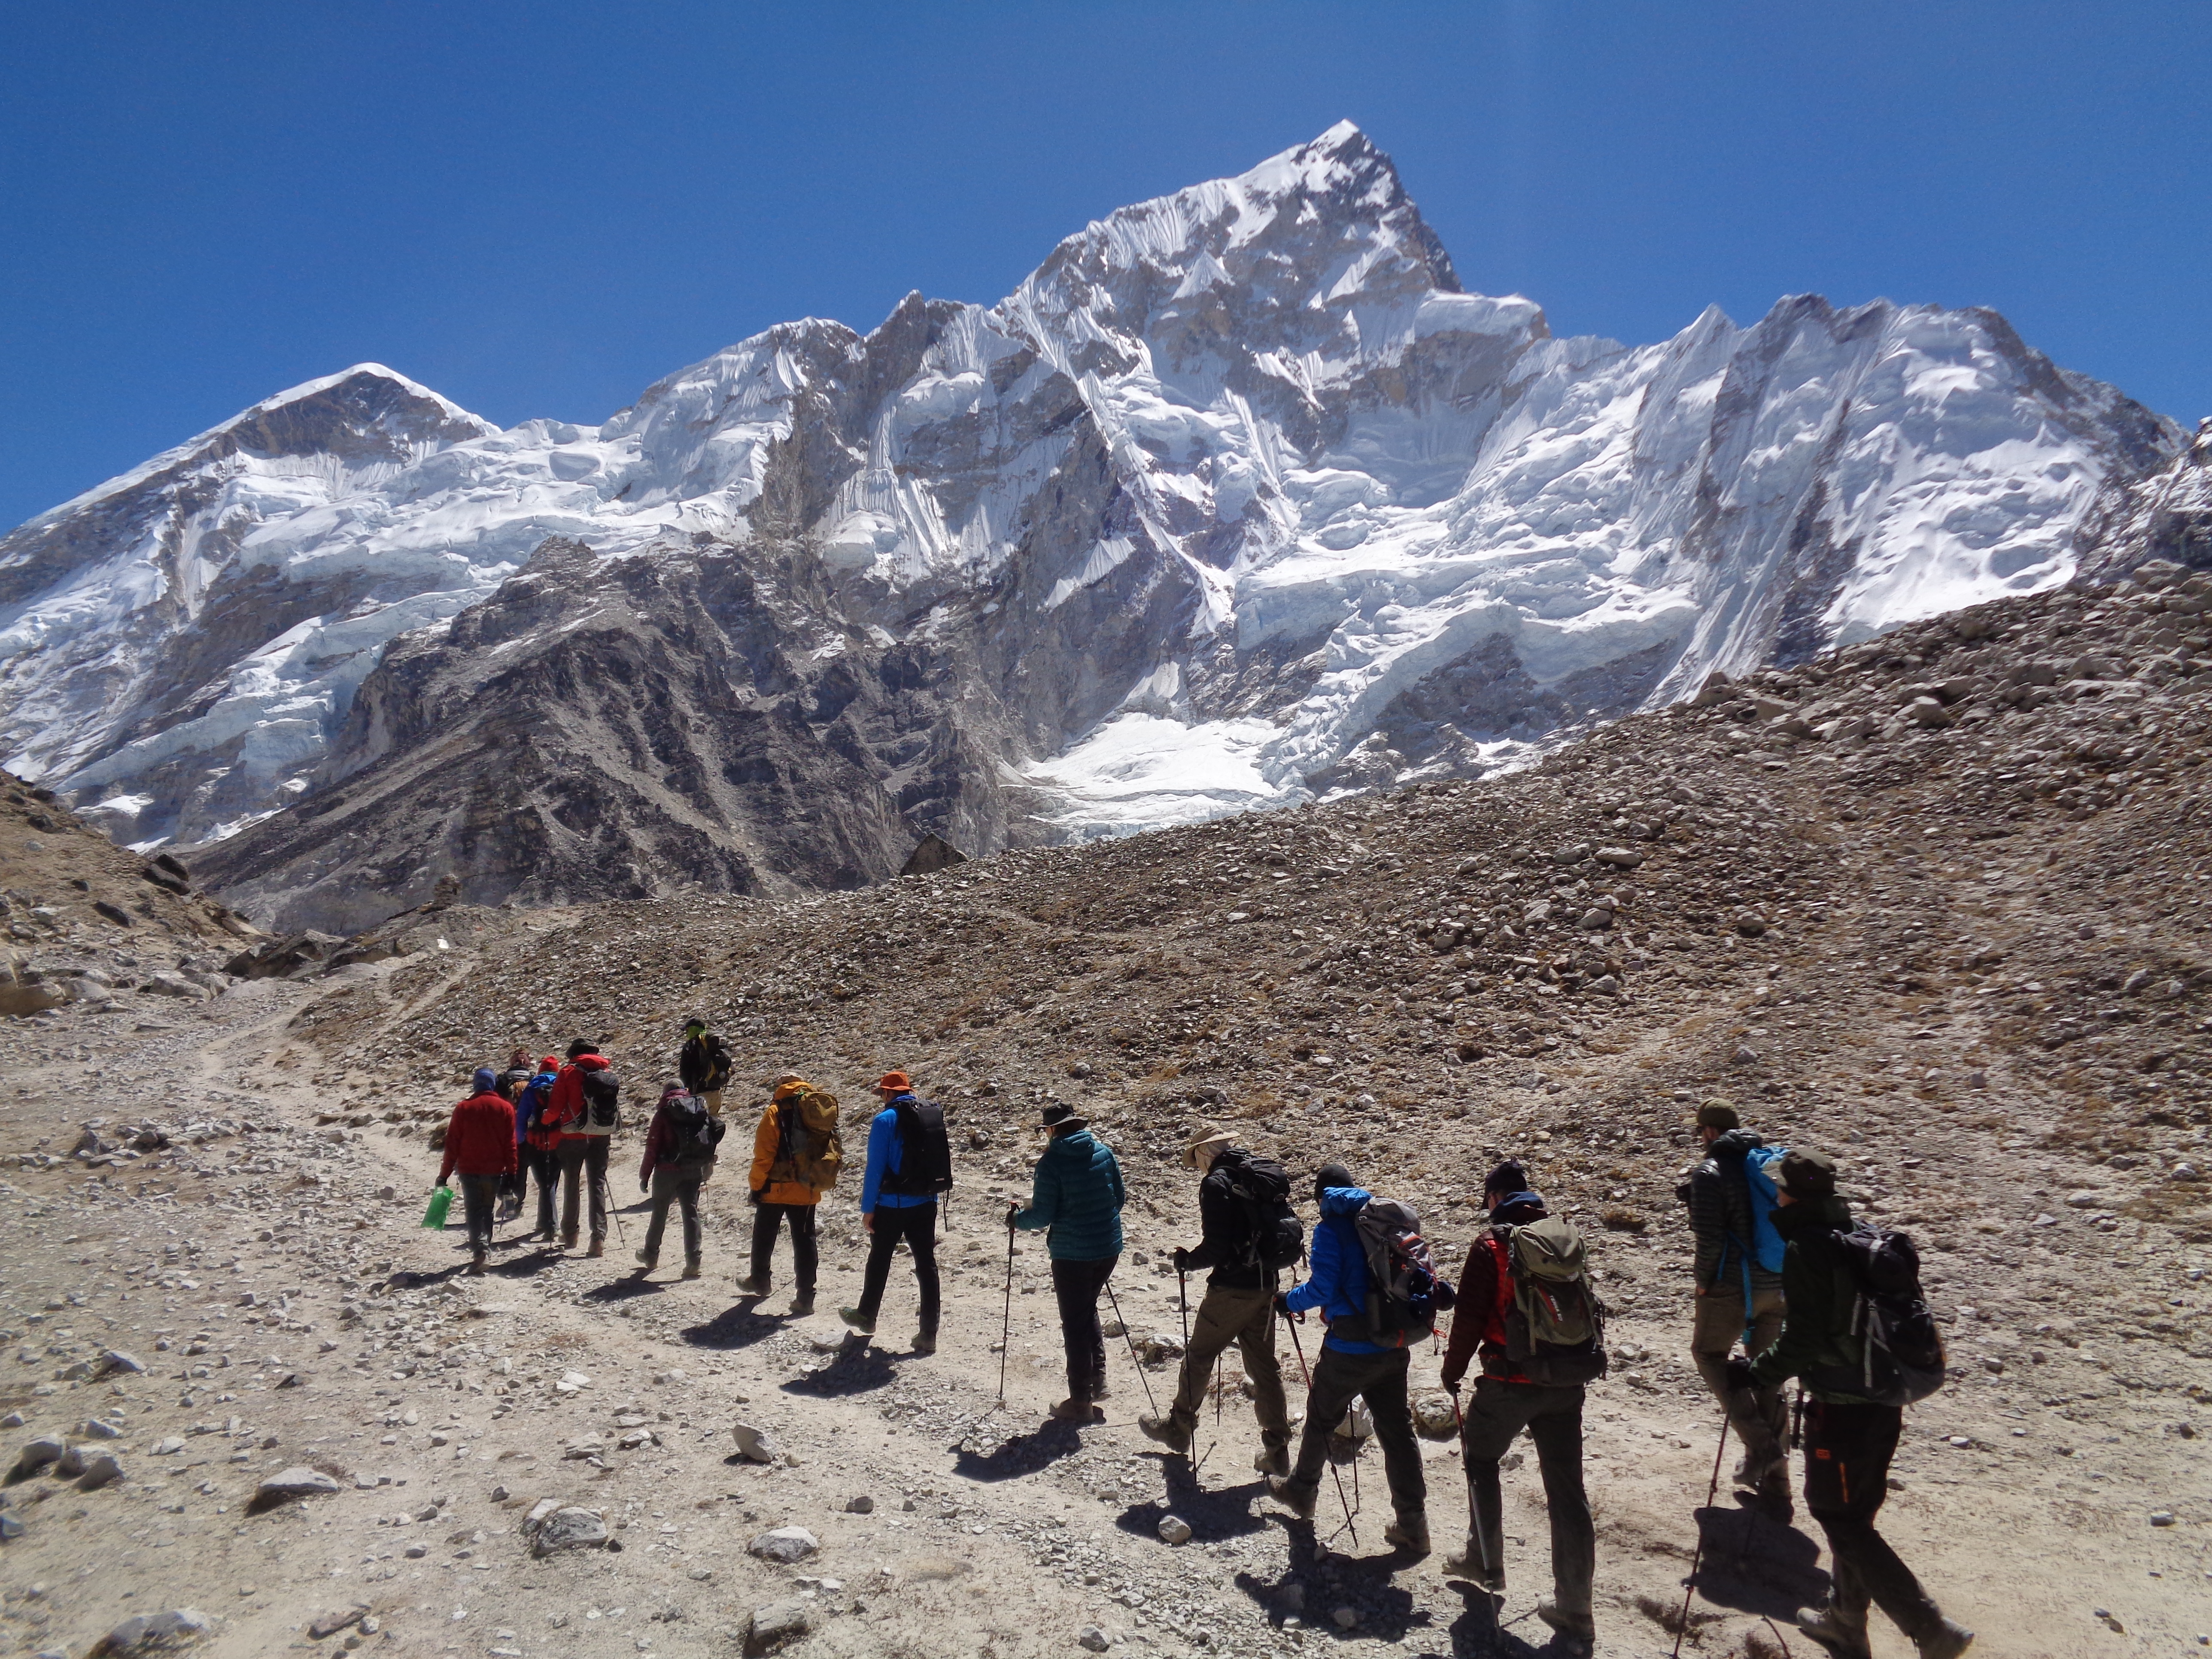 The final walk into Everest Base Camp